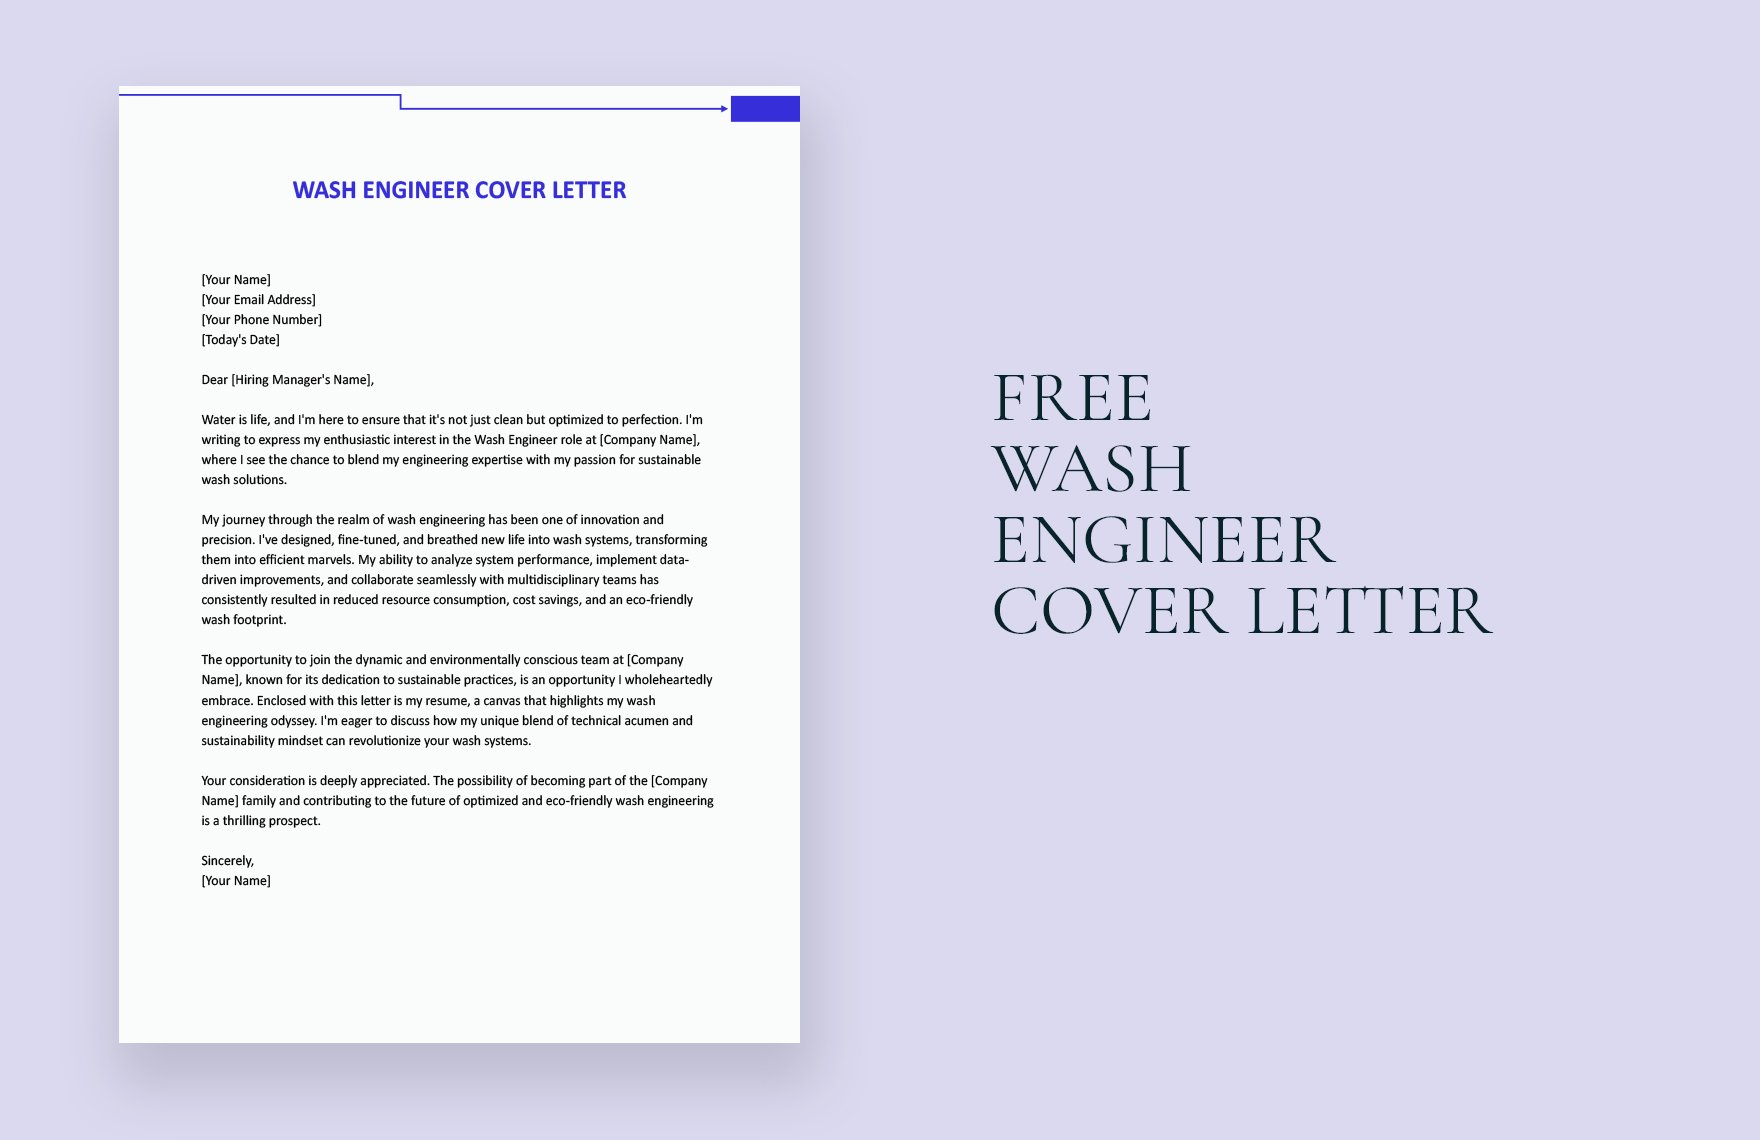 Wash Engineer Cover Letter in Word, Google Docs